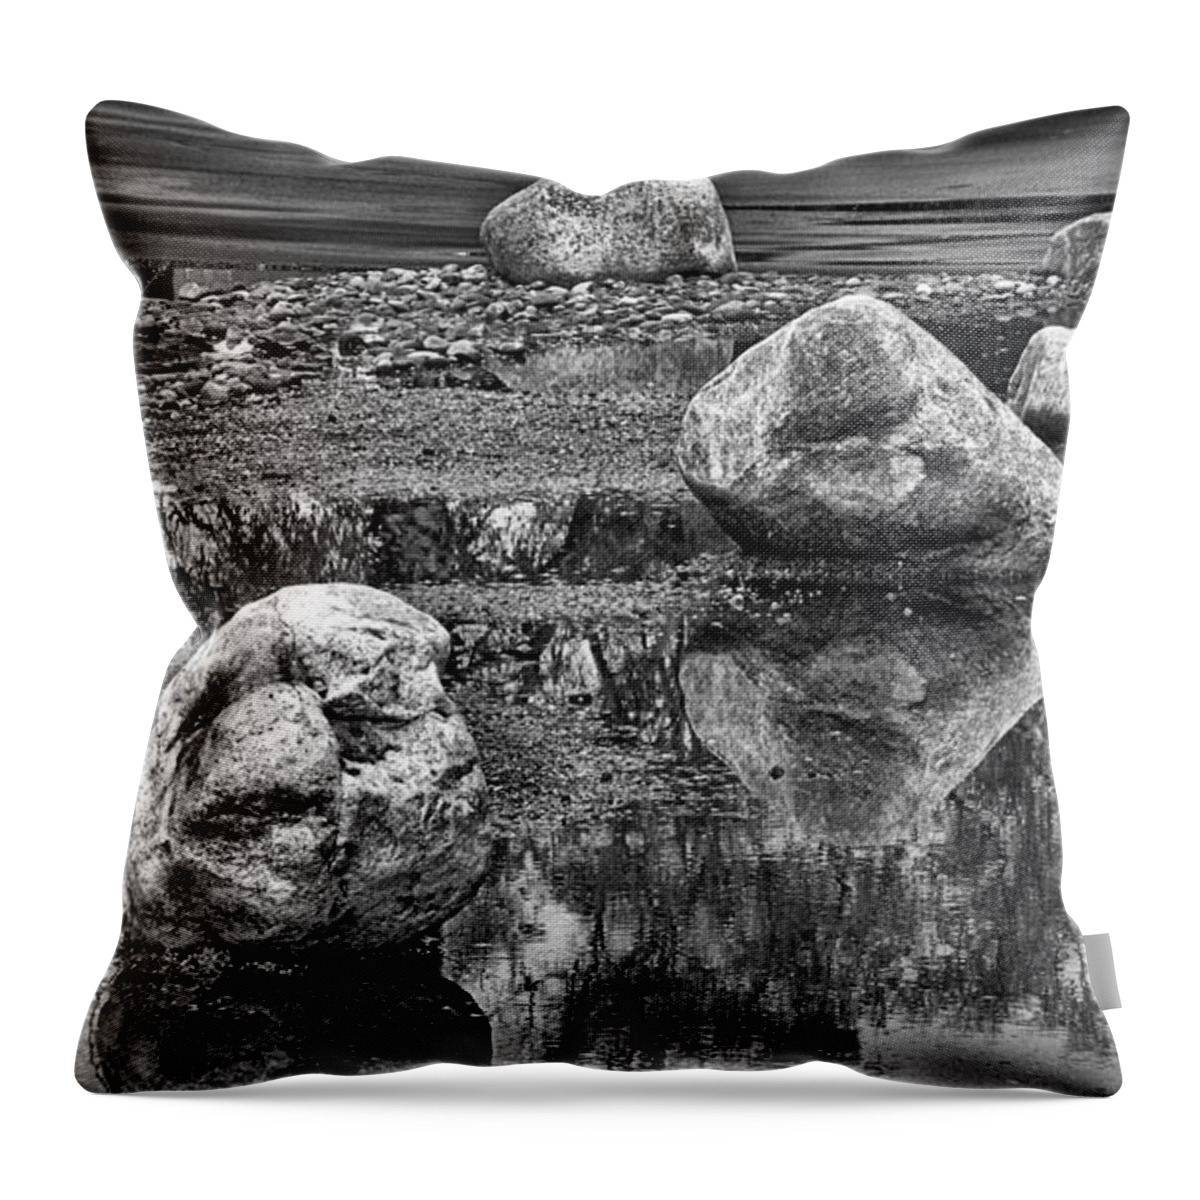 Rocks Throw Pillow featuring the photograph Fallen Rocks by Bradford Turner